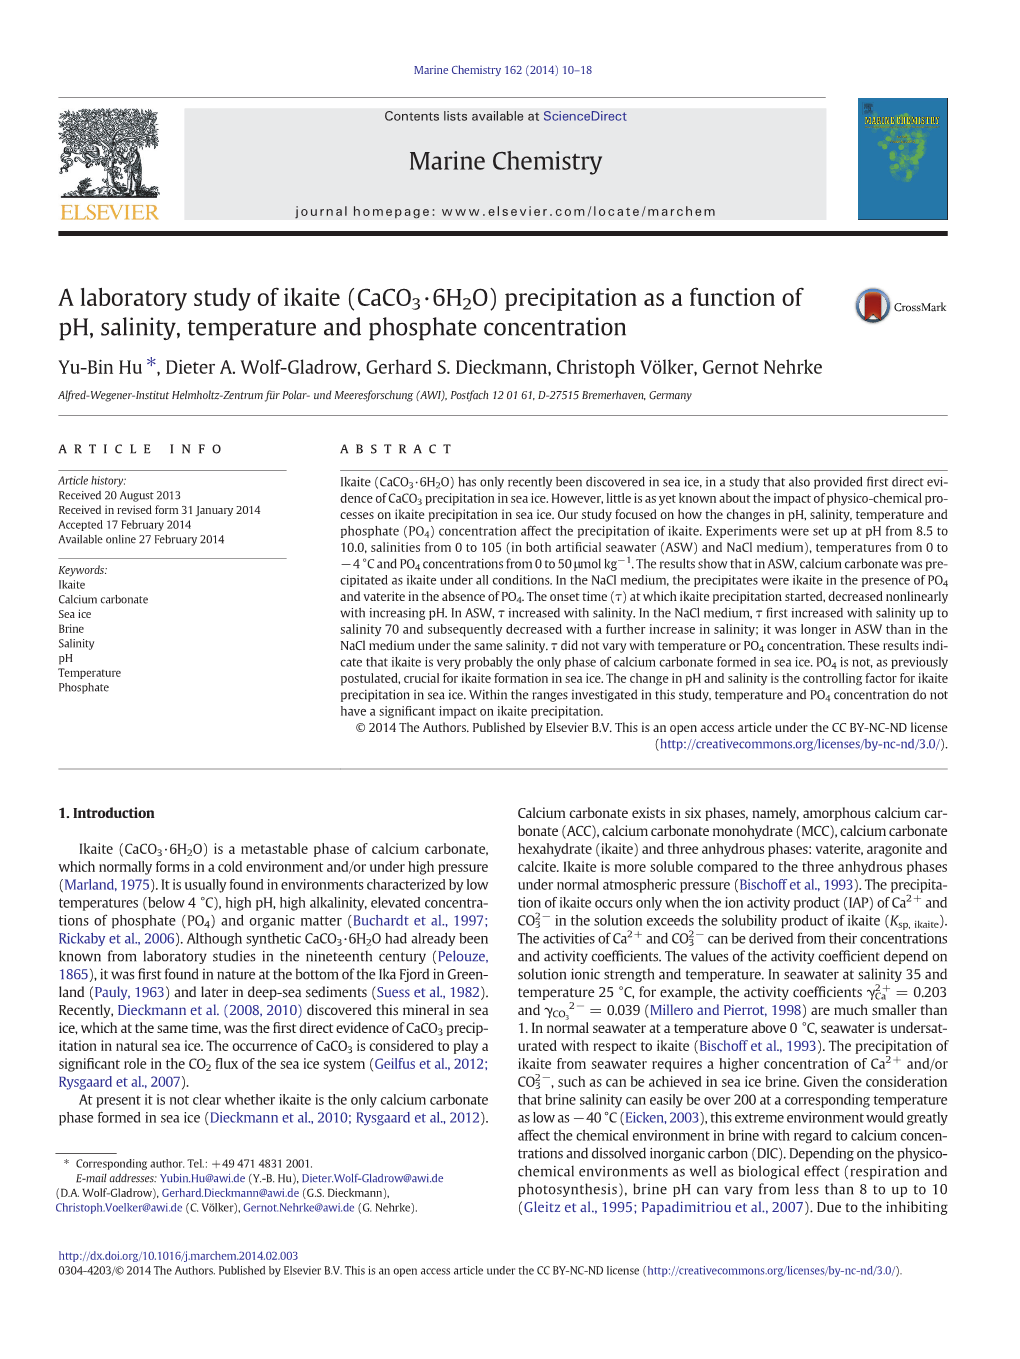 A Laboratory Study of Ikaite (Caco3·6H2O) Precipitation As a Function of Ph, Salinity, Temperature and Phosphate Concentration